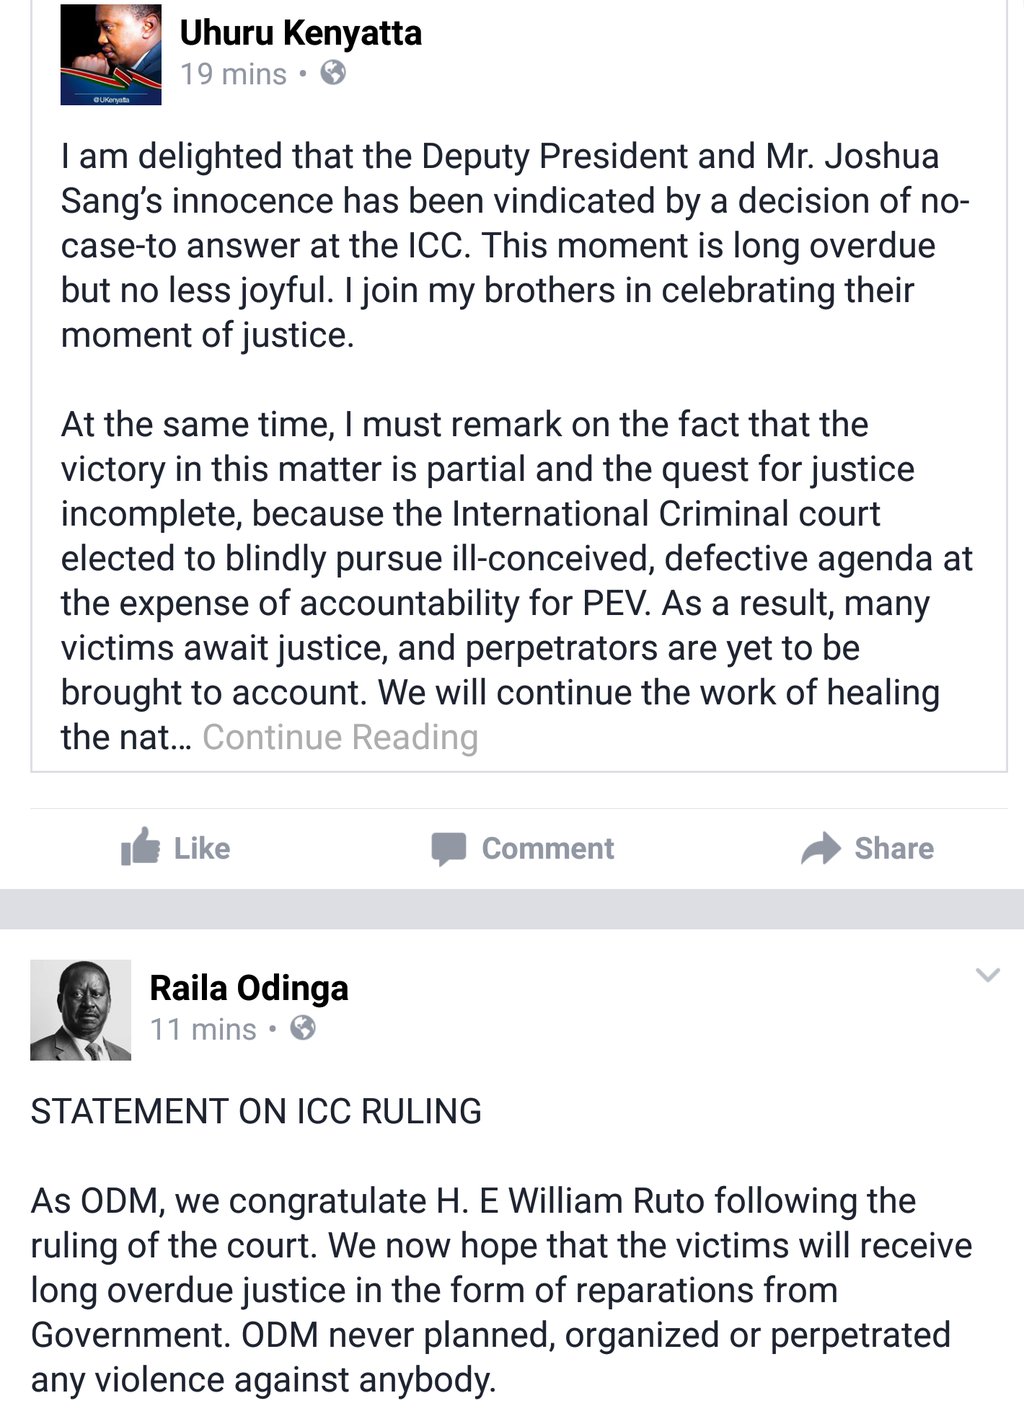 Uhuru Kenyatta and Raila Odinga congratulate William Ruto and Joshua Arap Sang after no case to answer motion in the ICC was dropped